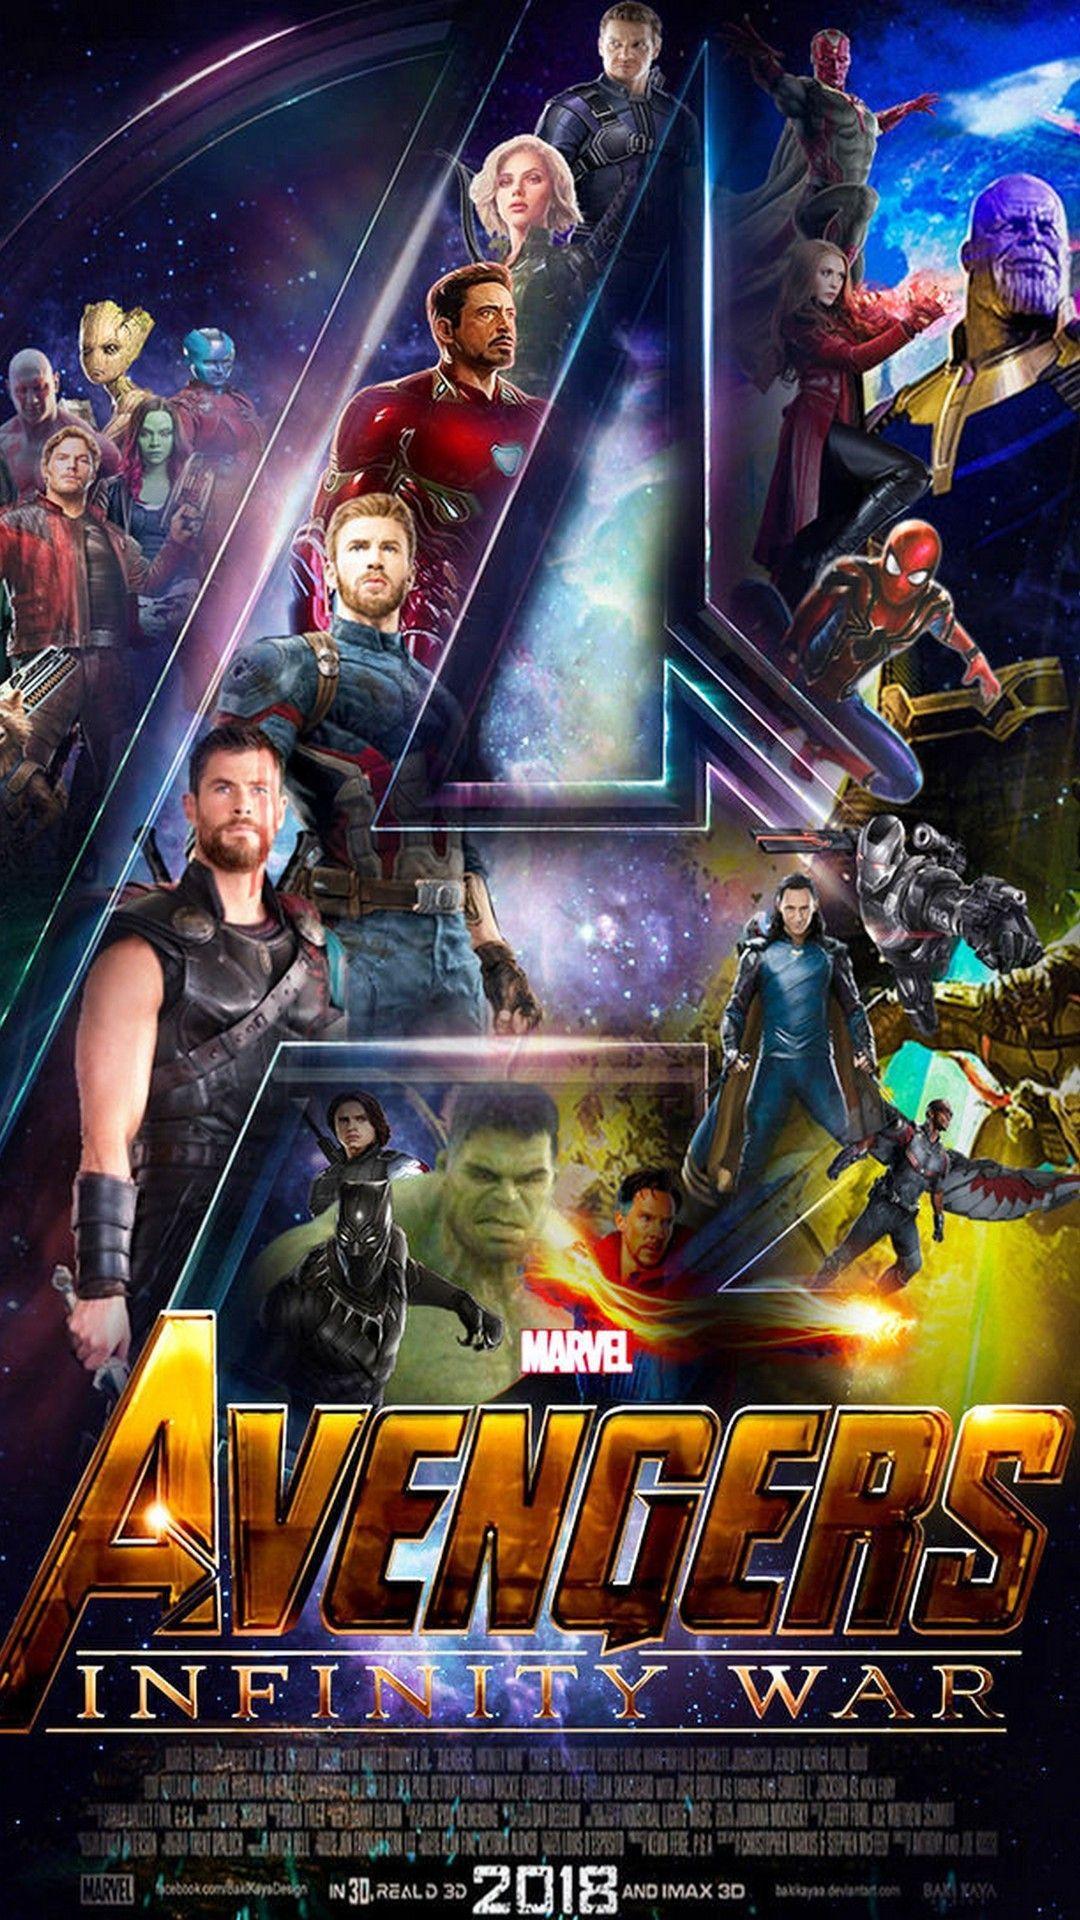 Avengers: Infinity War for windows download free